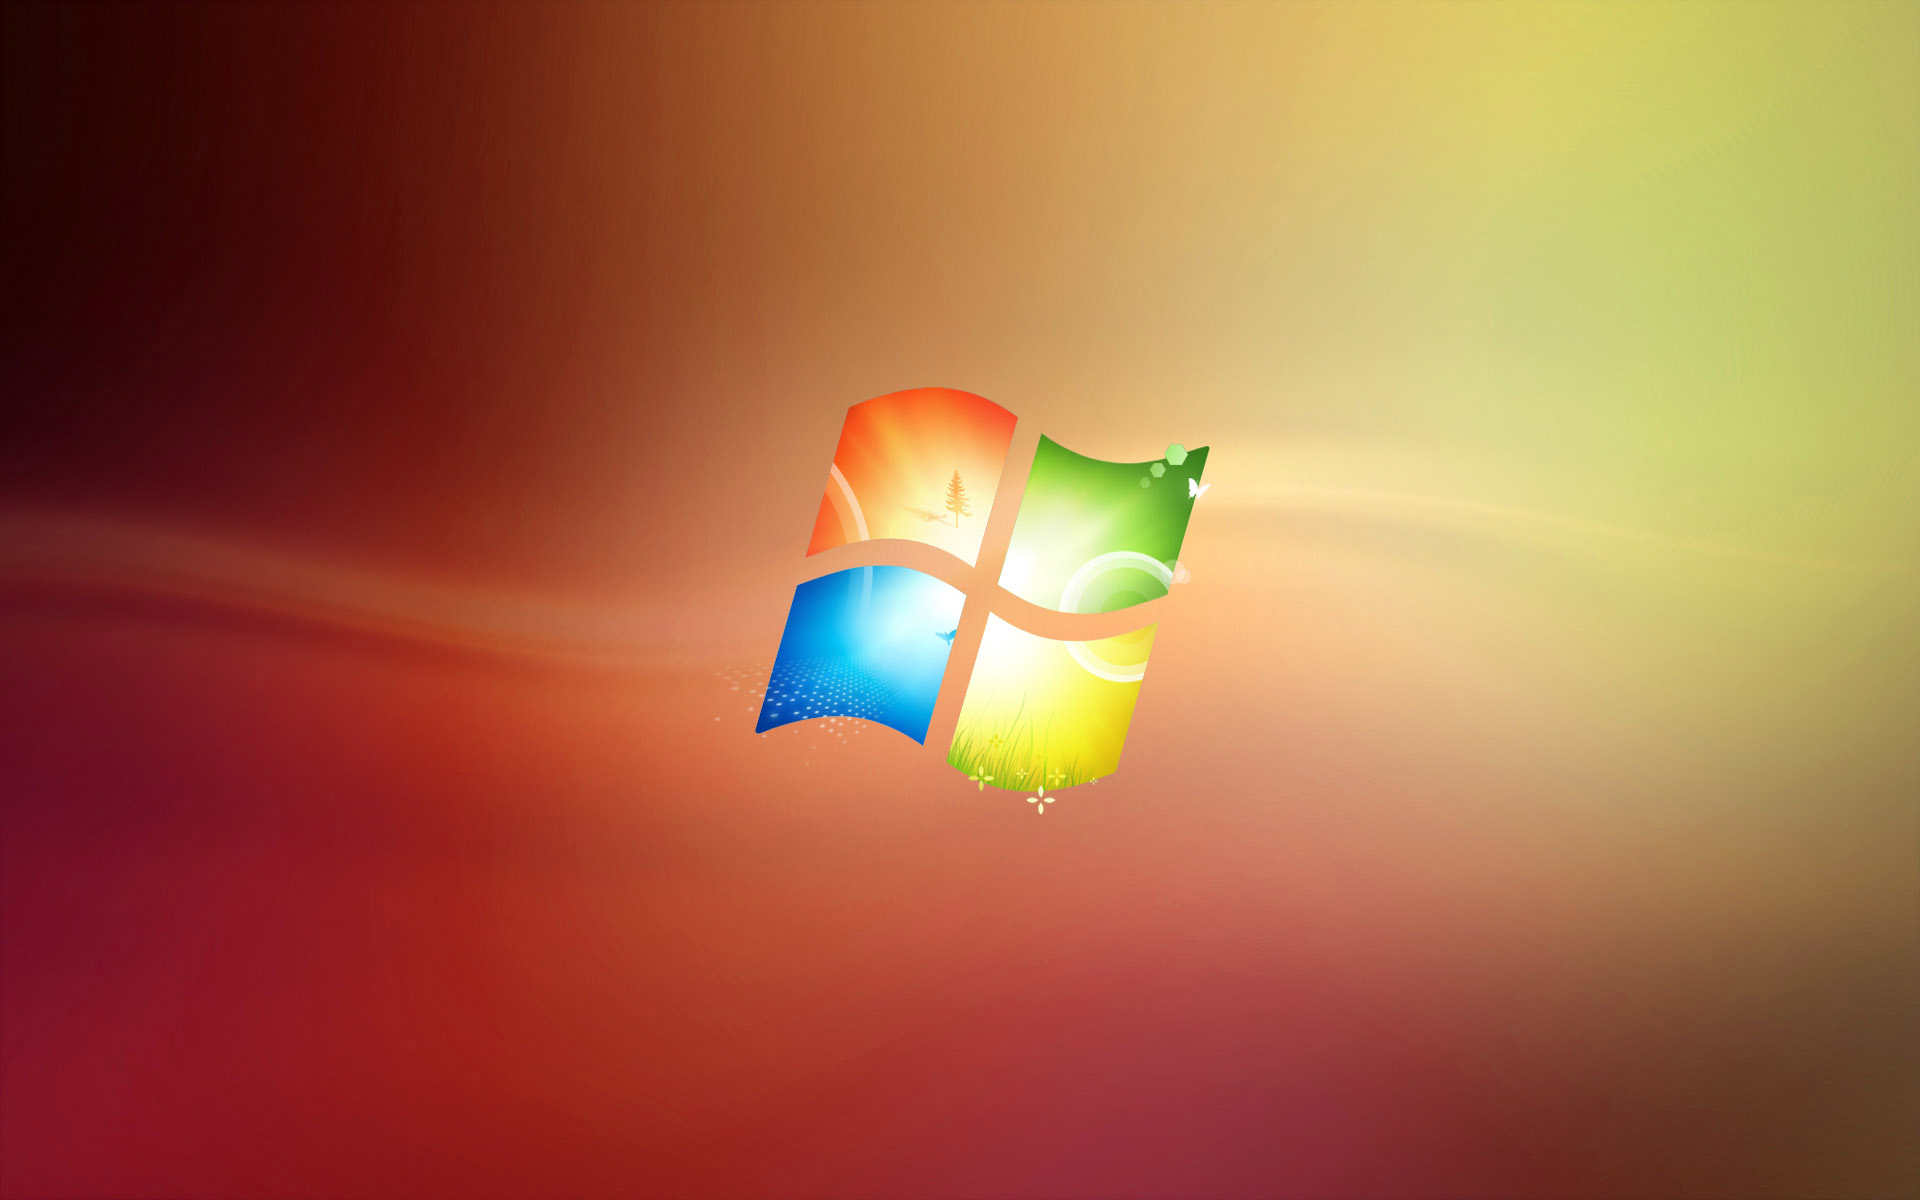 Windows Image Summer Theme HD Wallpaper And Background